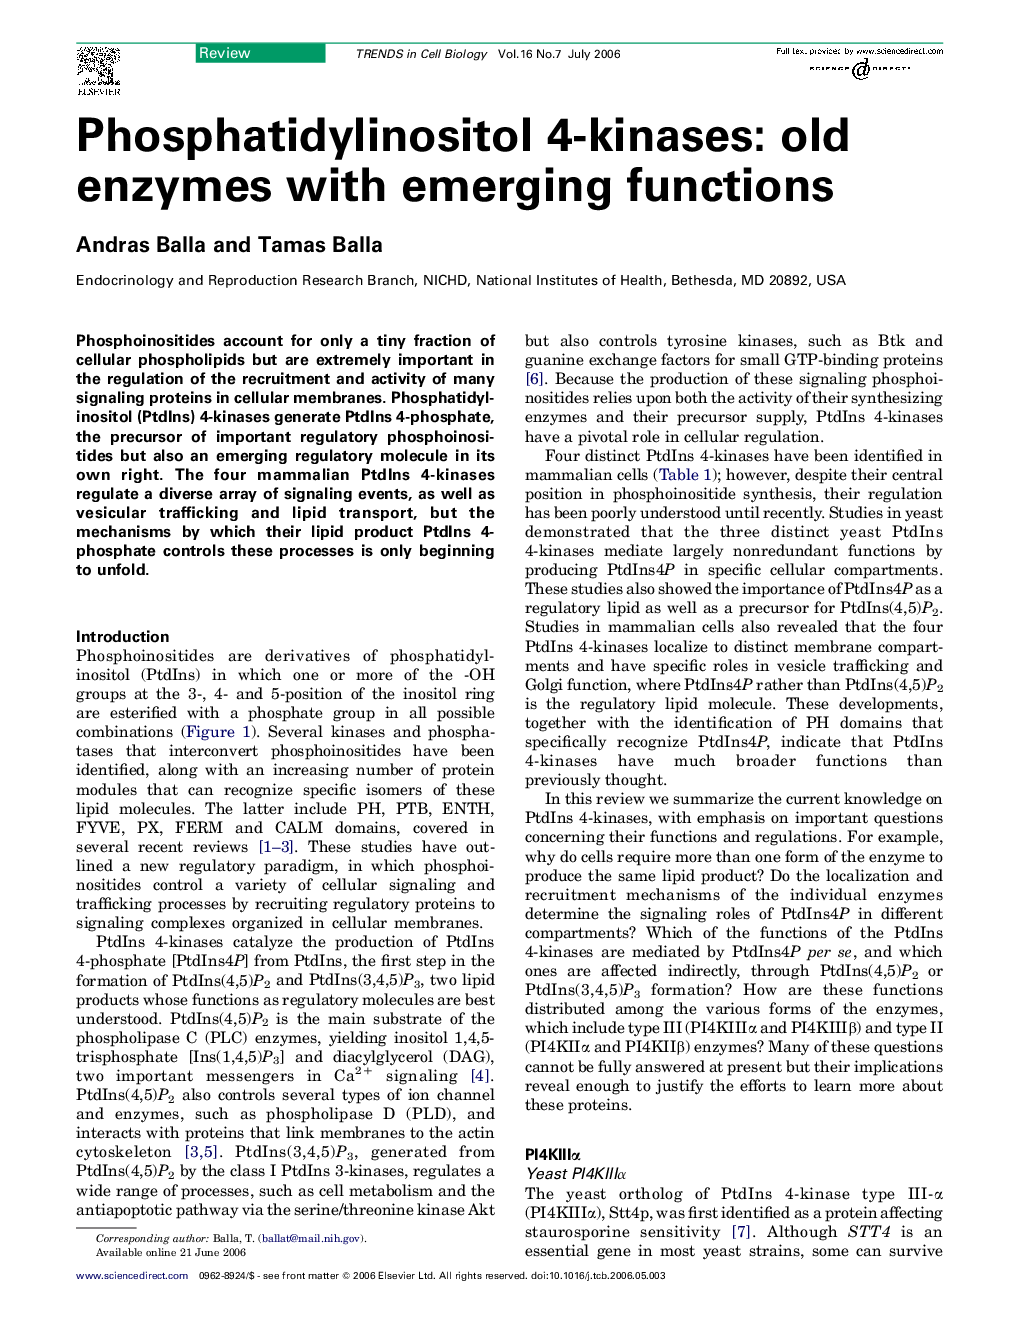 Phosphatidylinositol 4-kinases: old enzymes with emerging functions